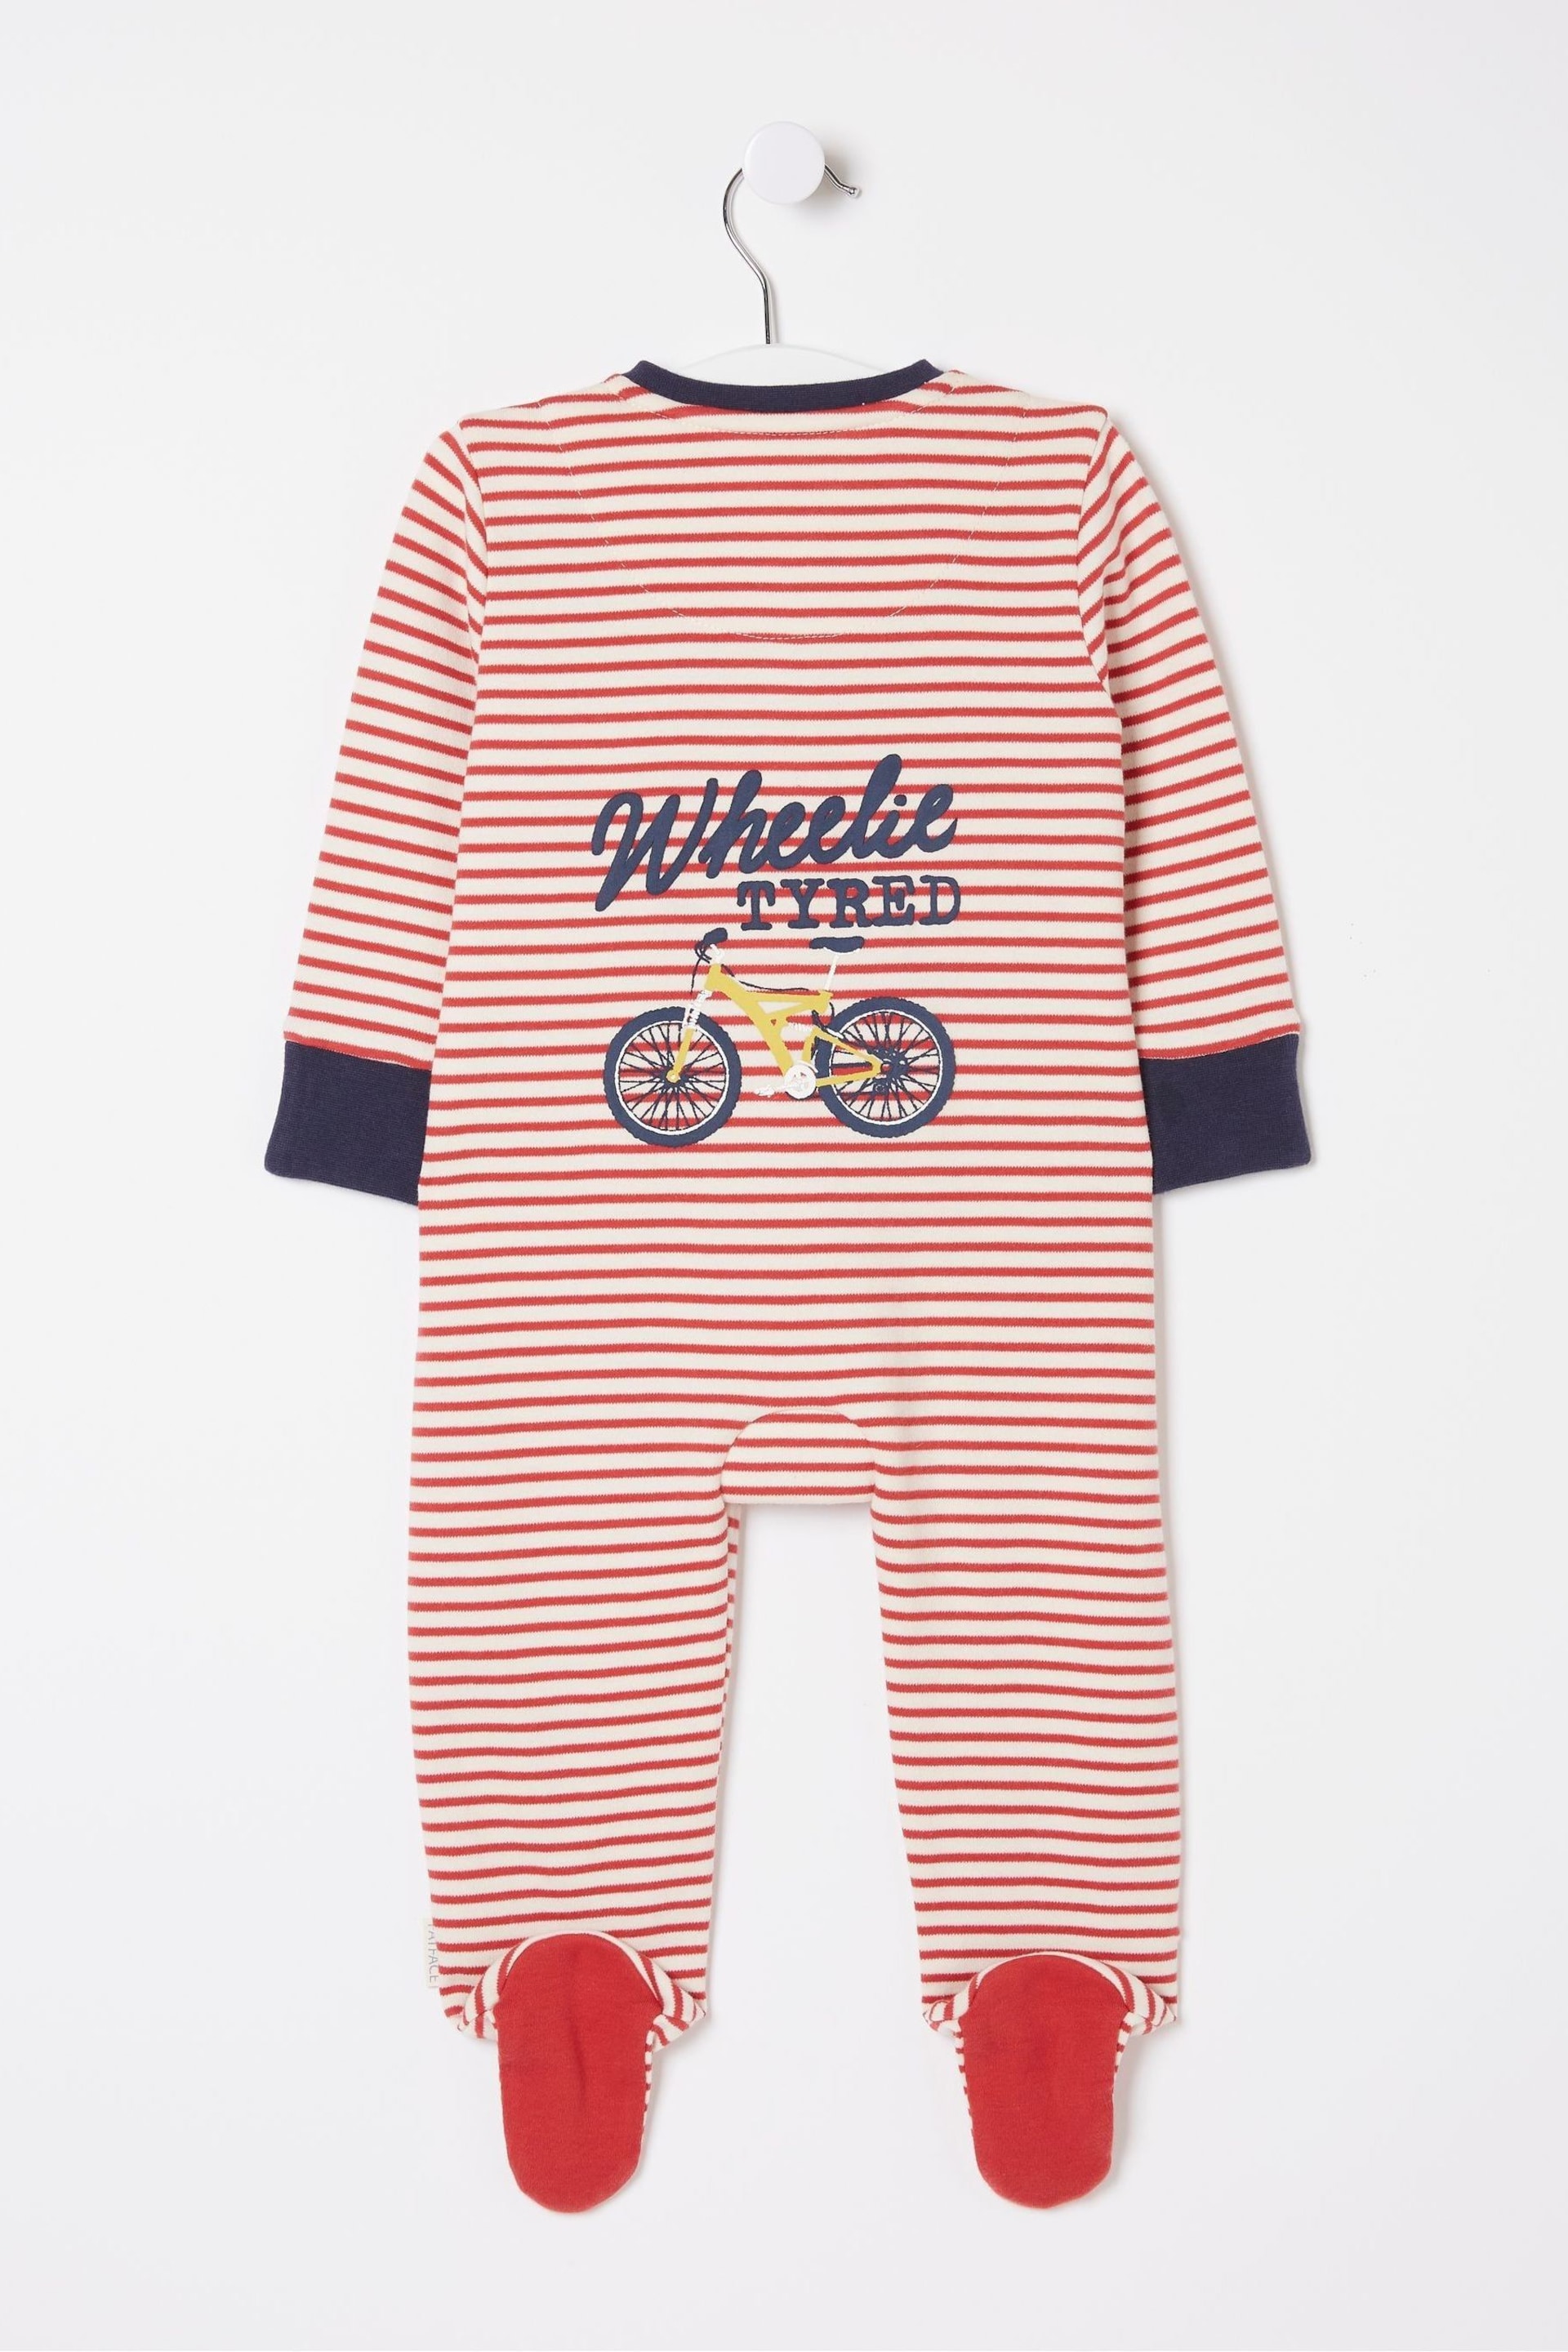 FatFace Red Bike Graphic Zipped Sleepsuit - Image 2 of 2